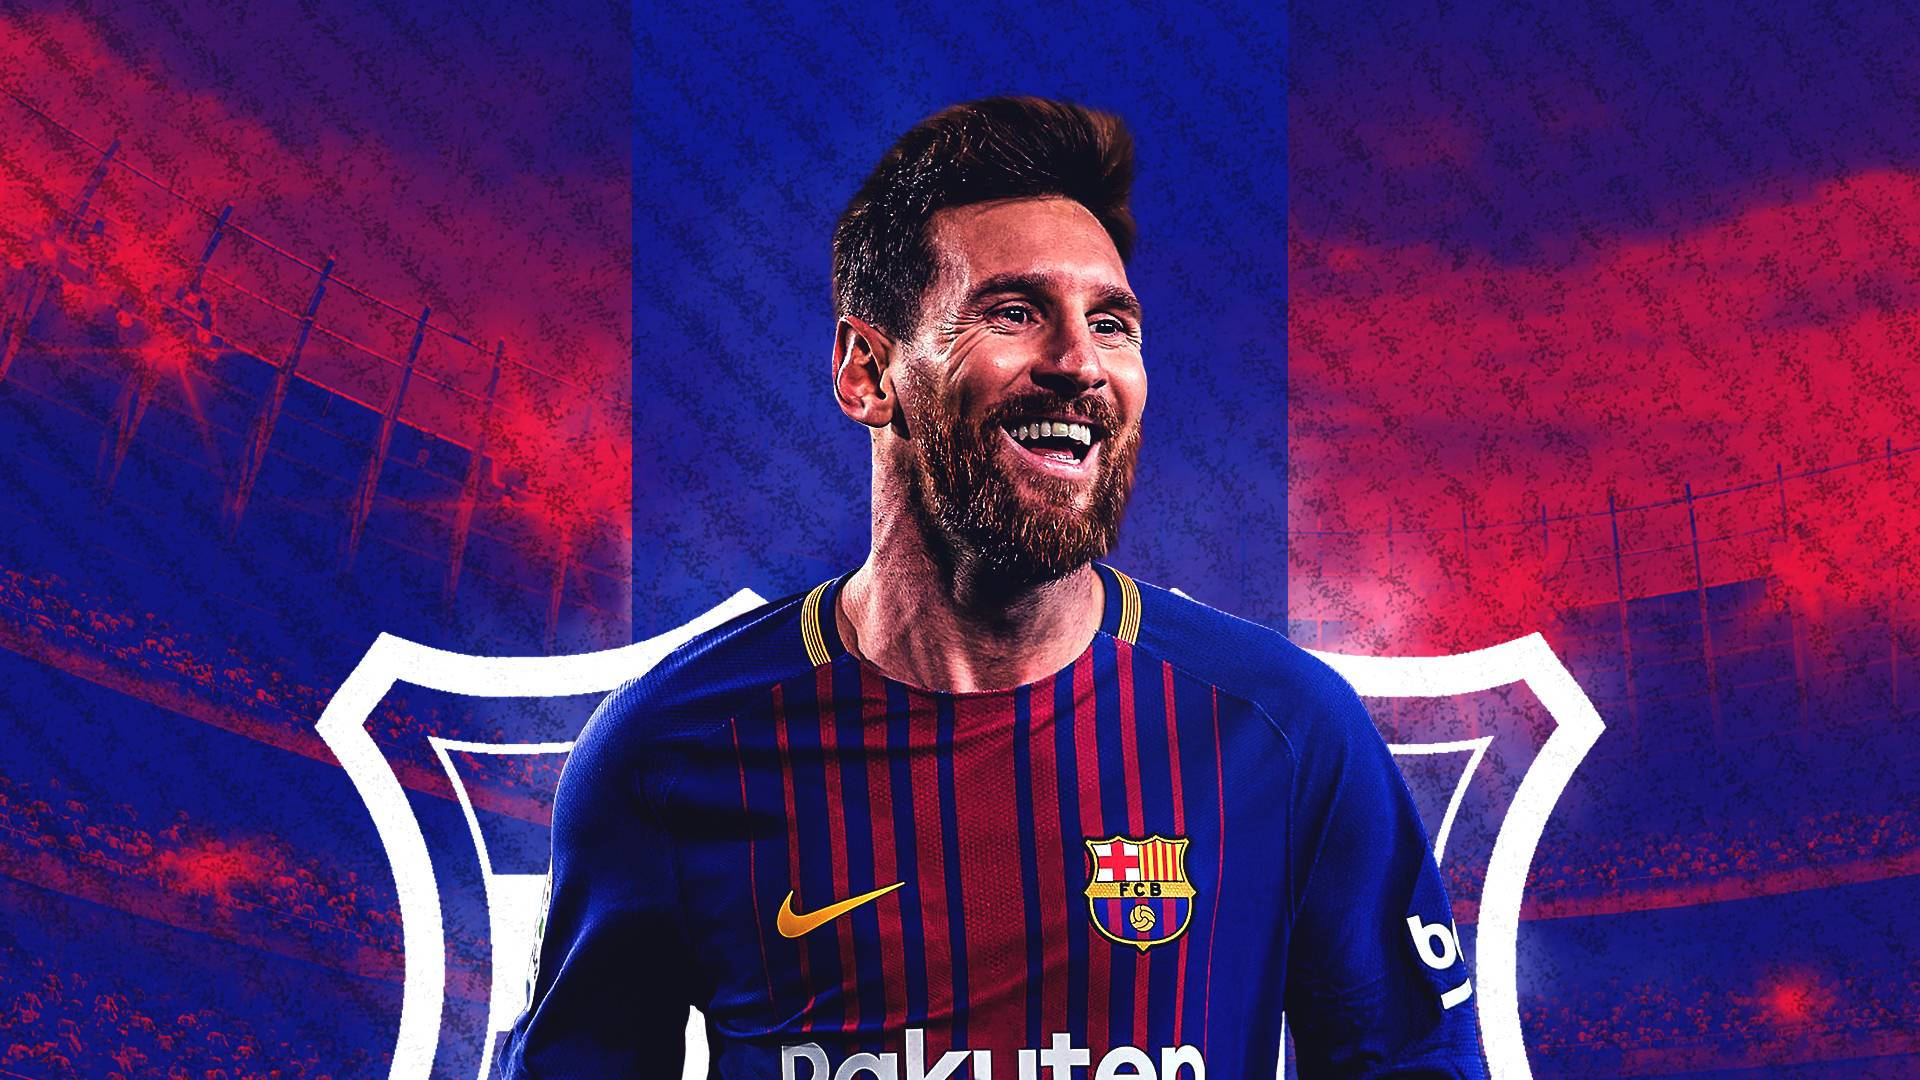 Free Messi Wallpaper Downloads, [200+] Messi Wallpapers for FREE ...